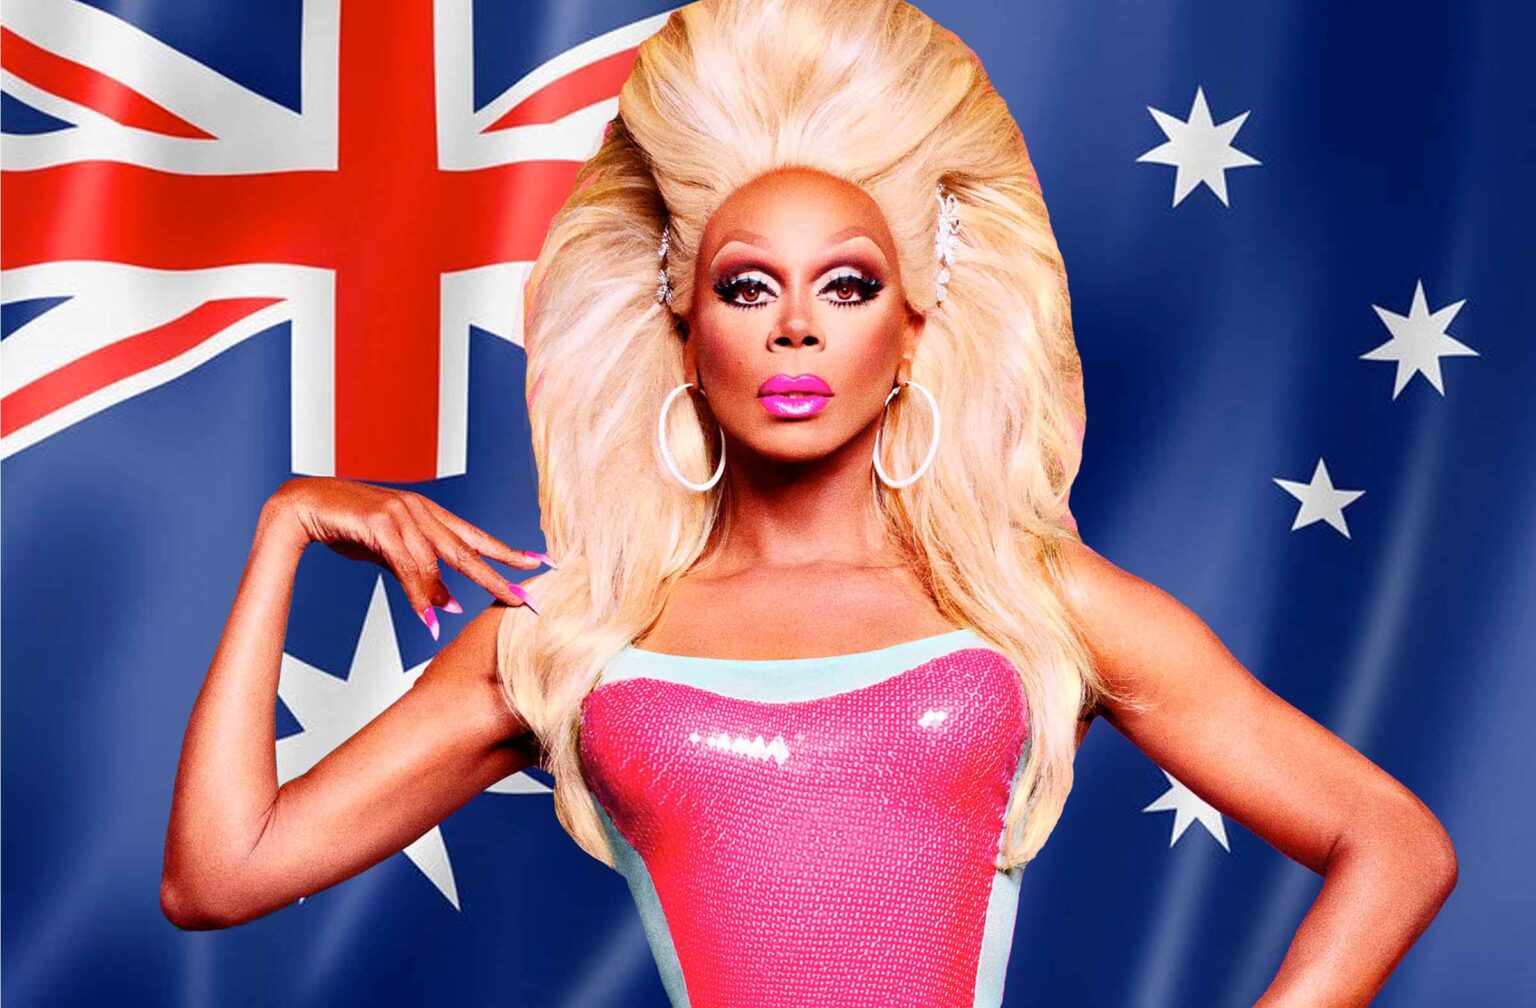 Production has begun on 'RuPaul's Drag Race' Down Under season 1 in New Zealand and Australia. Global domination continues fiercely. Here's the tea!